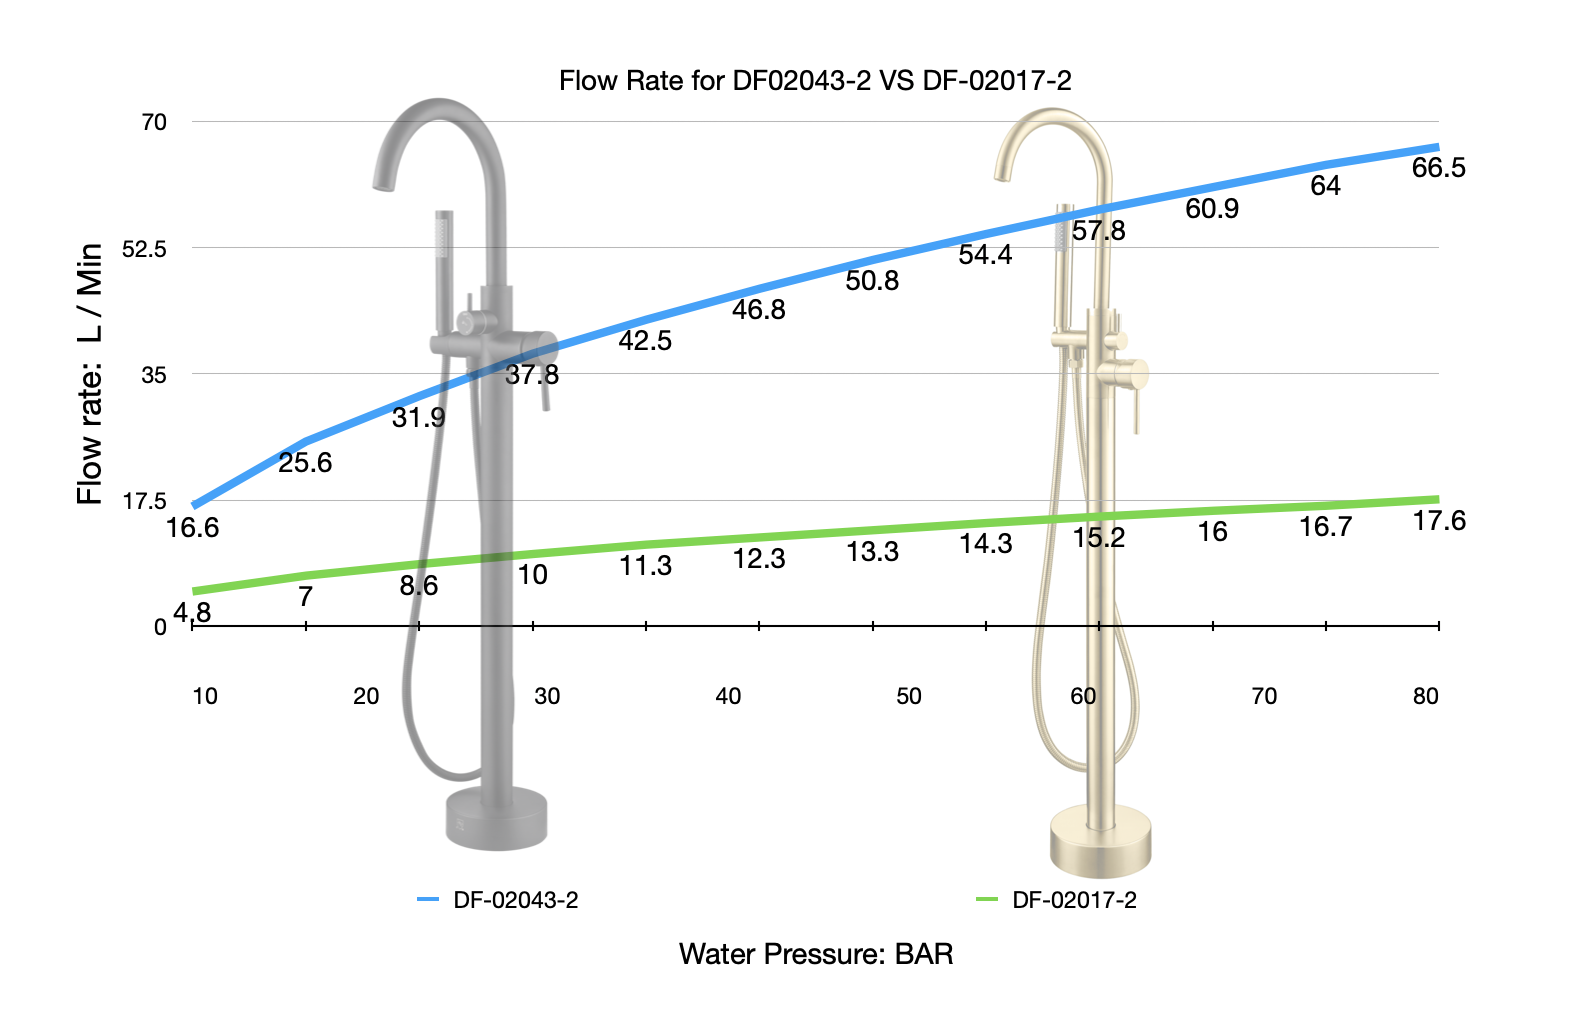 Flow Rate for DF-02043-2 VS DF-02017-2